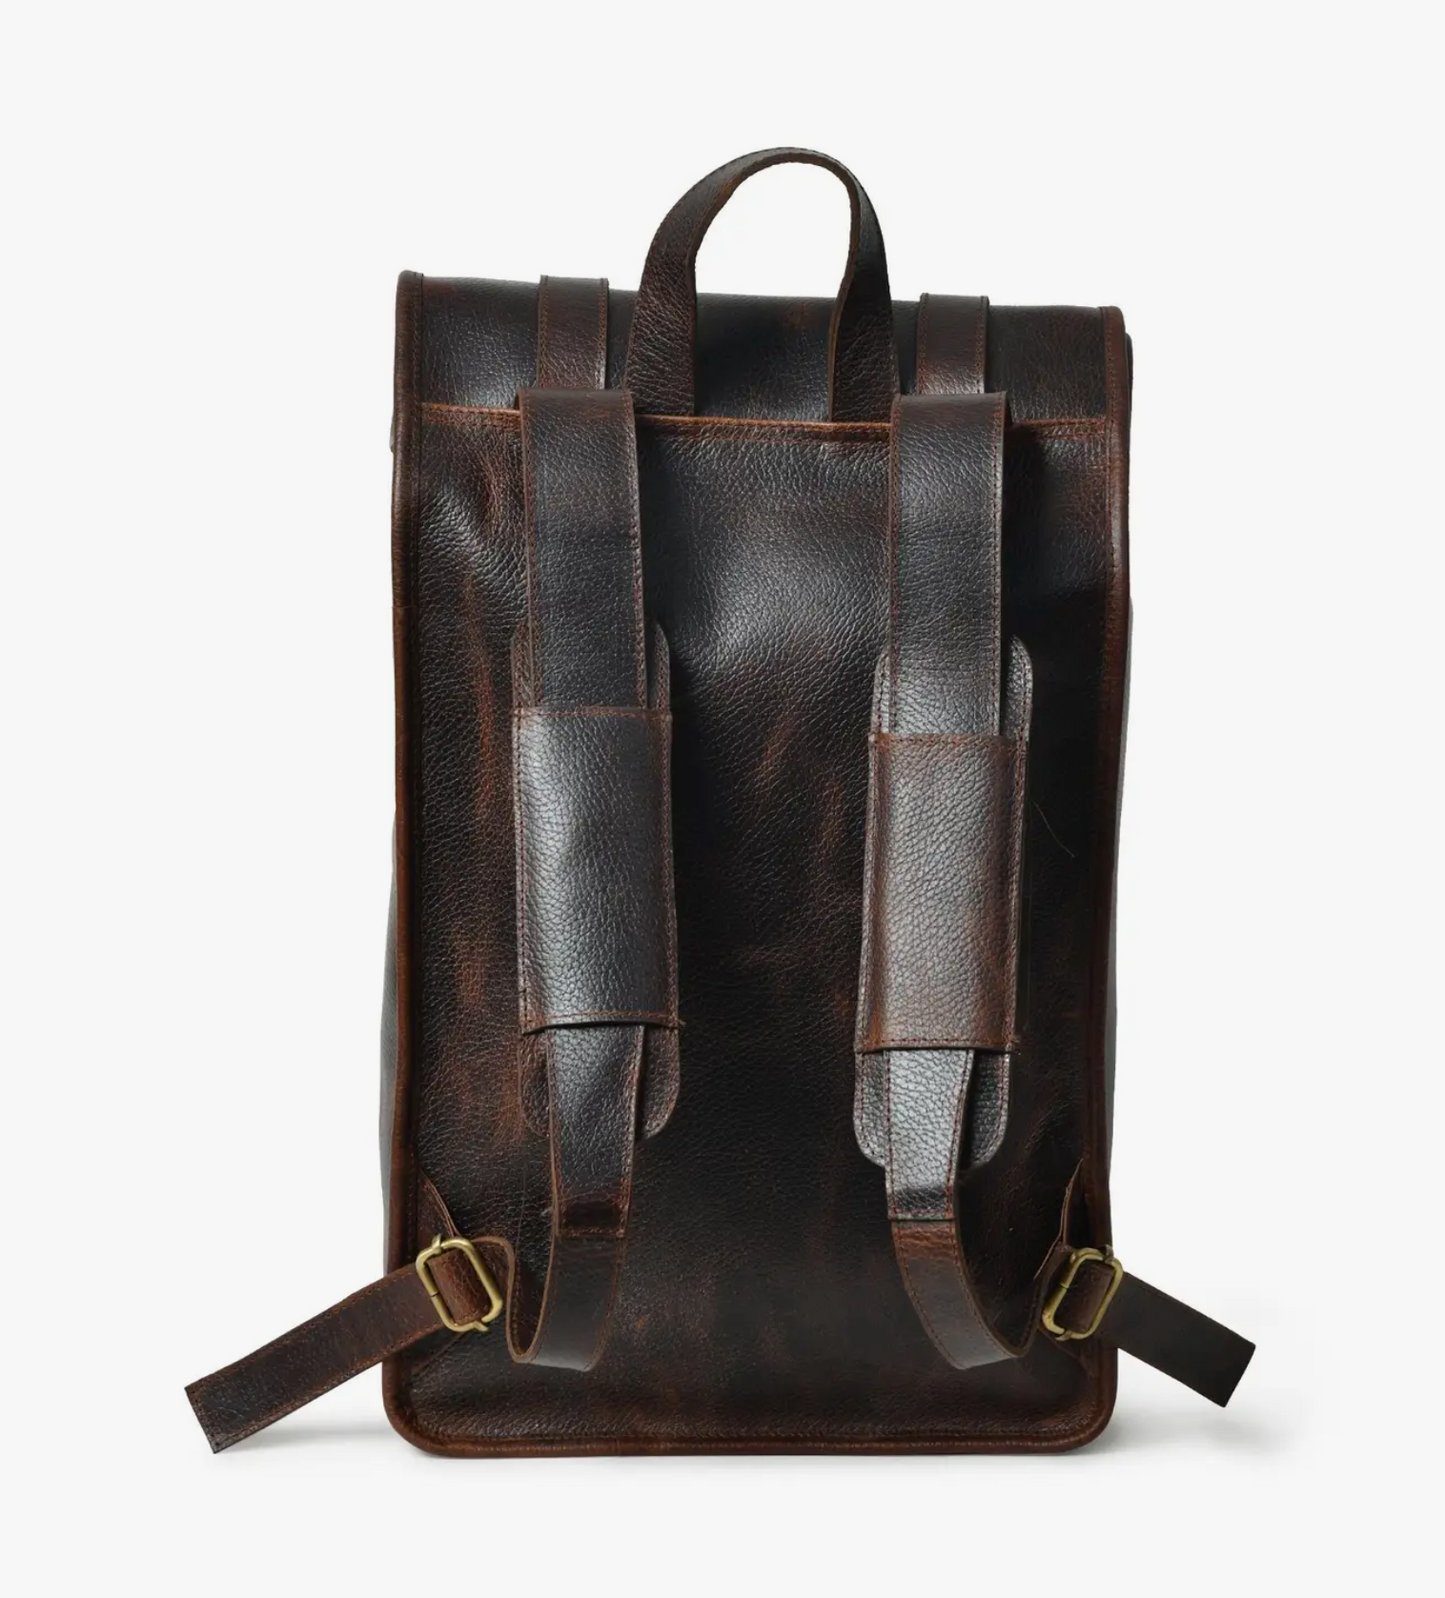 DuVall Leather Rolltop Backpack – Coffee